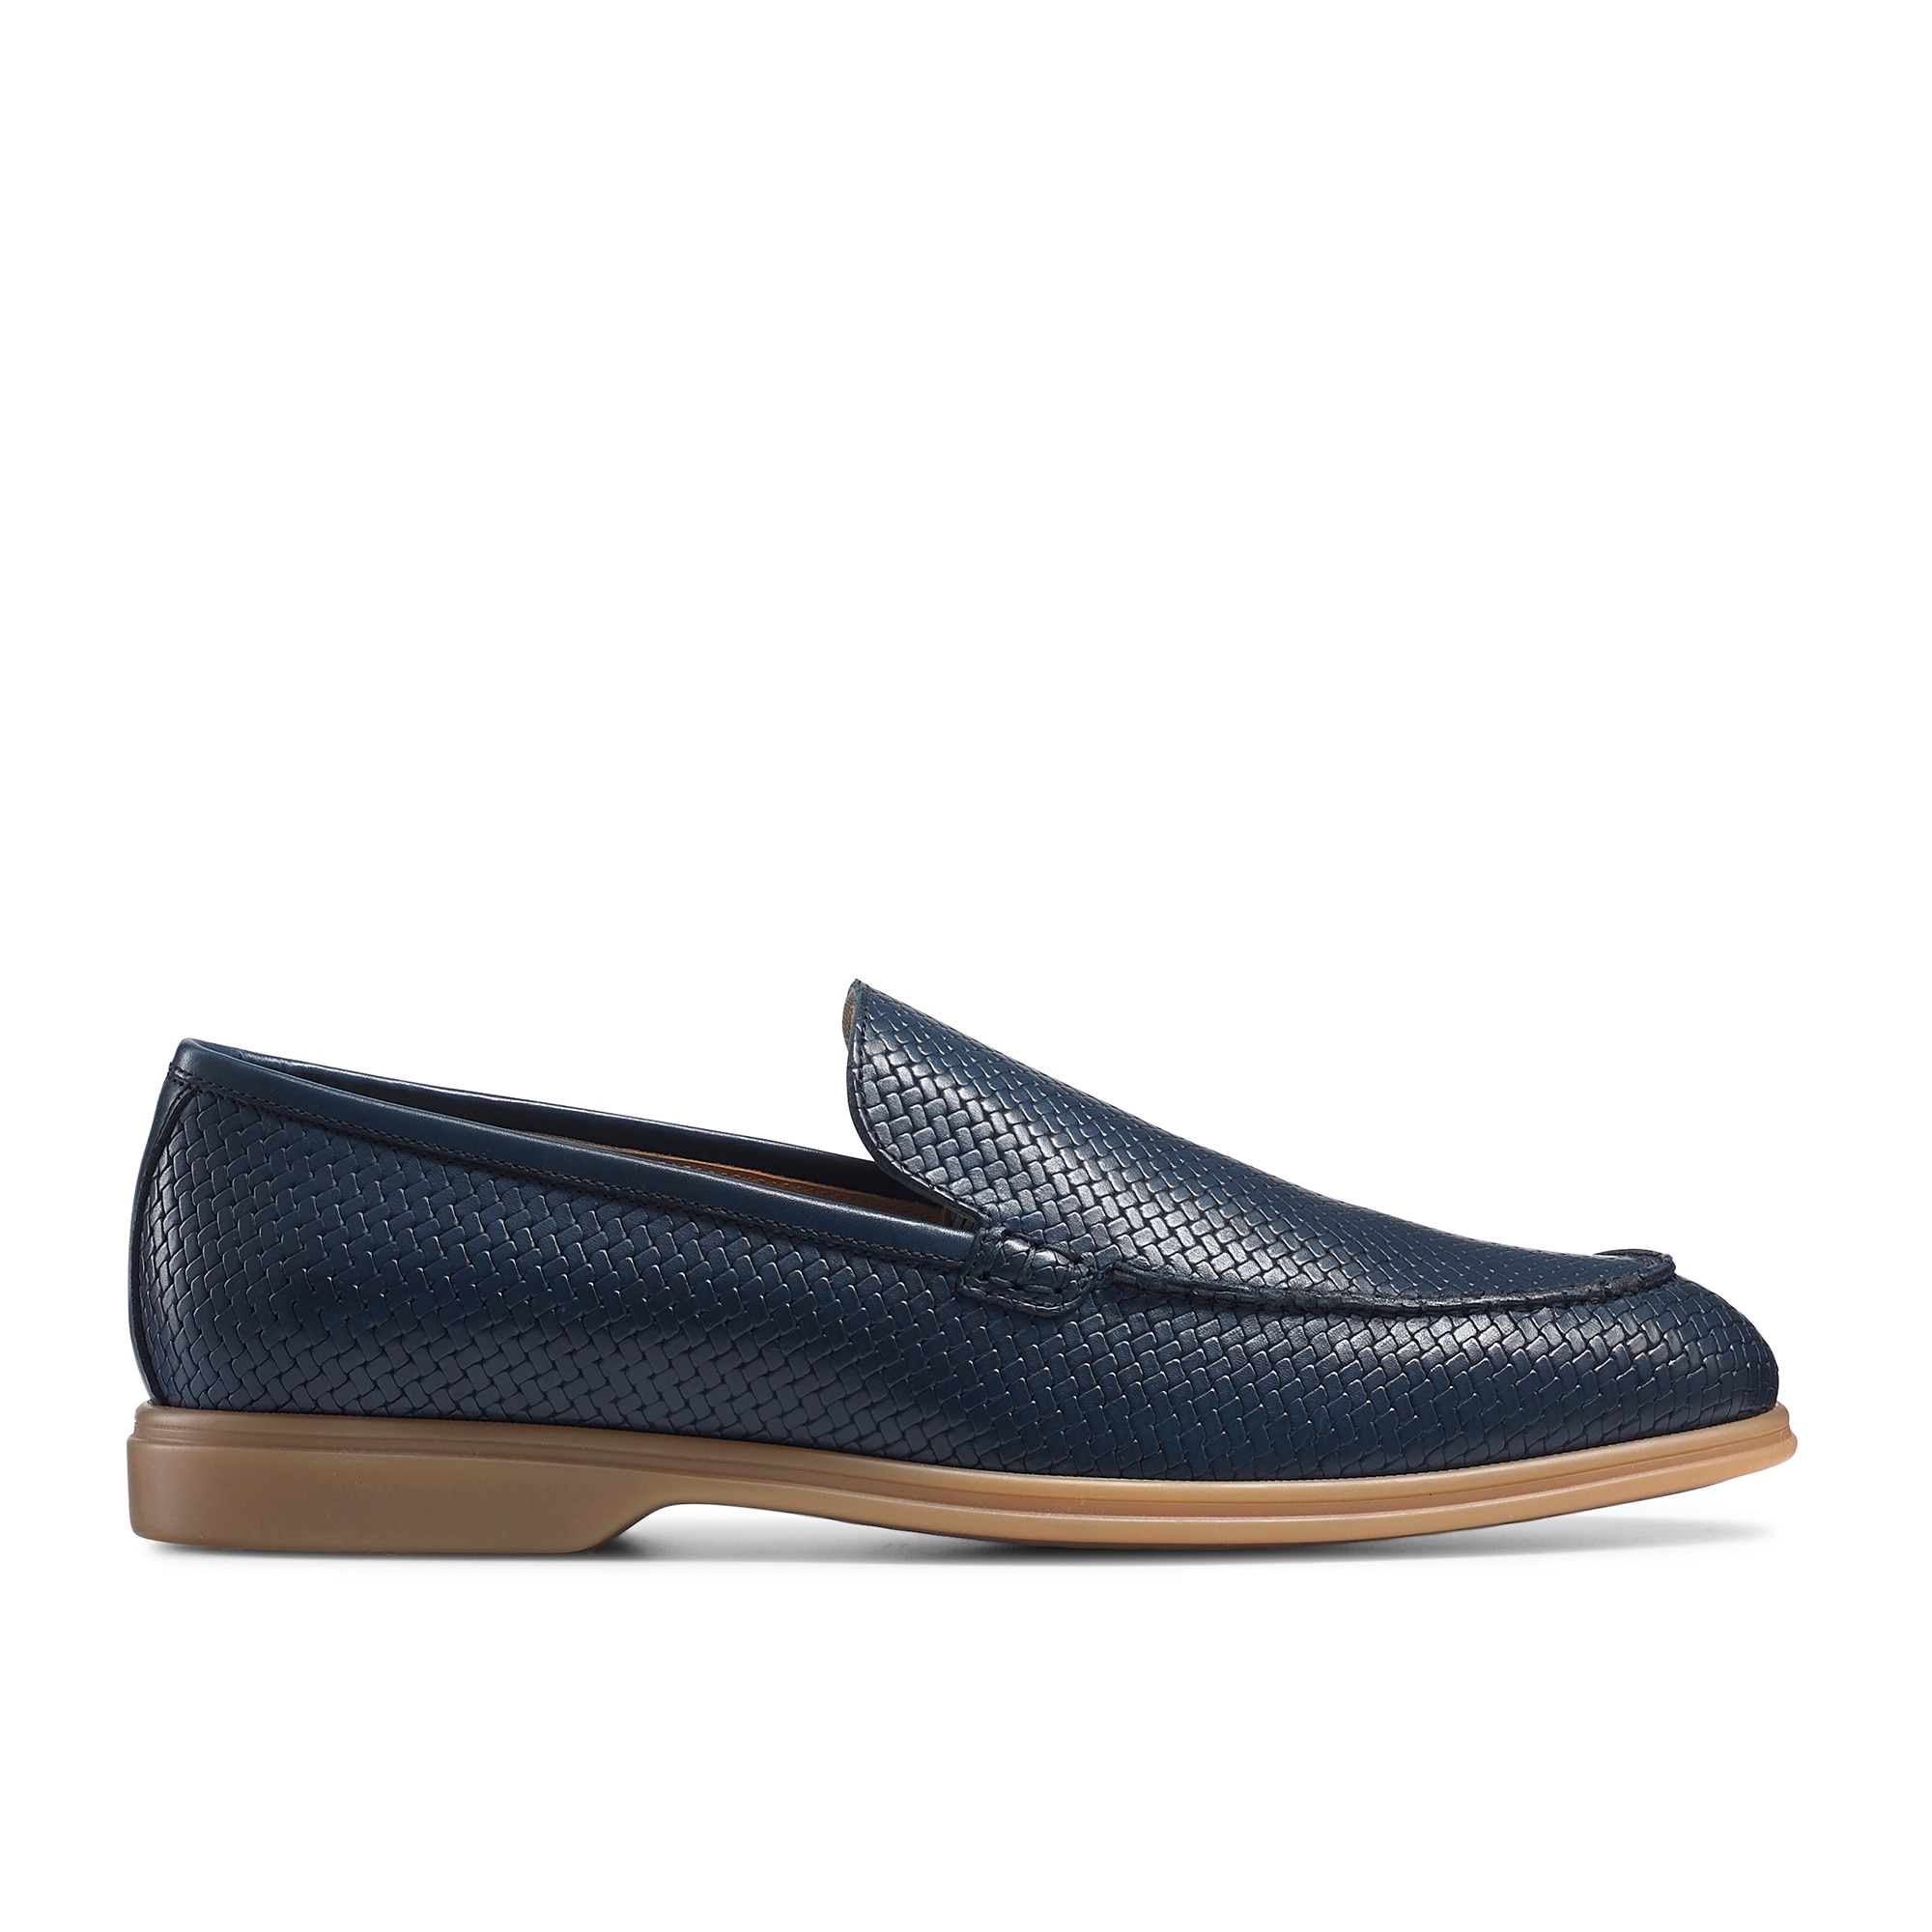 Russell and Bromley Zeno mens loafer in navy blue